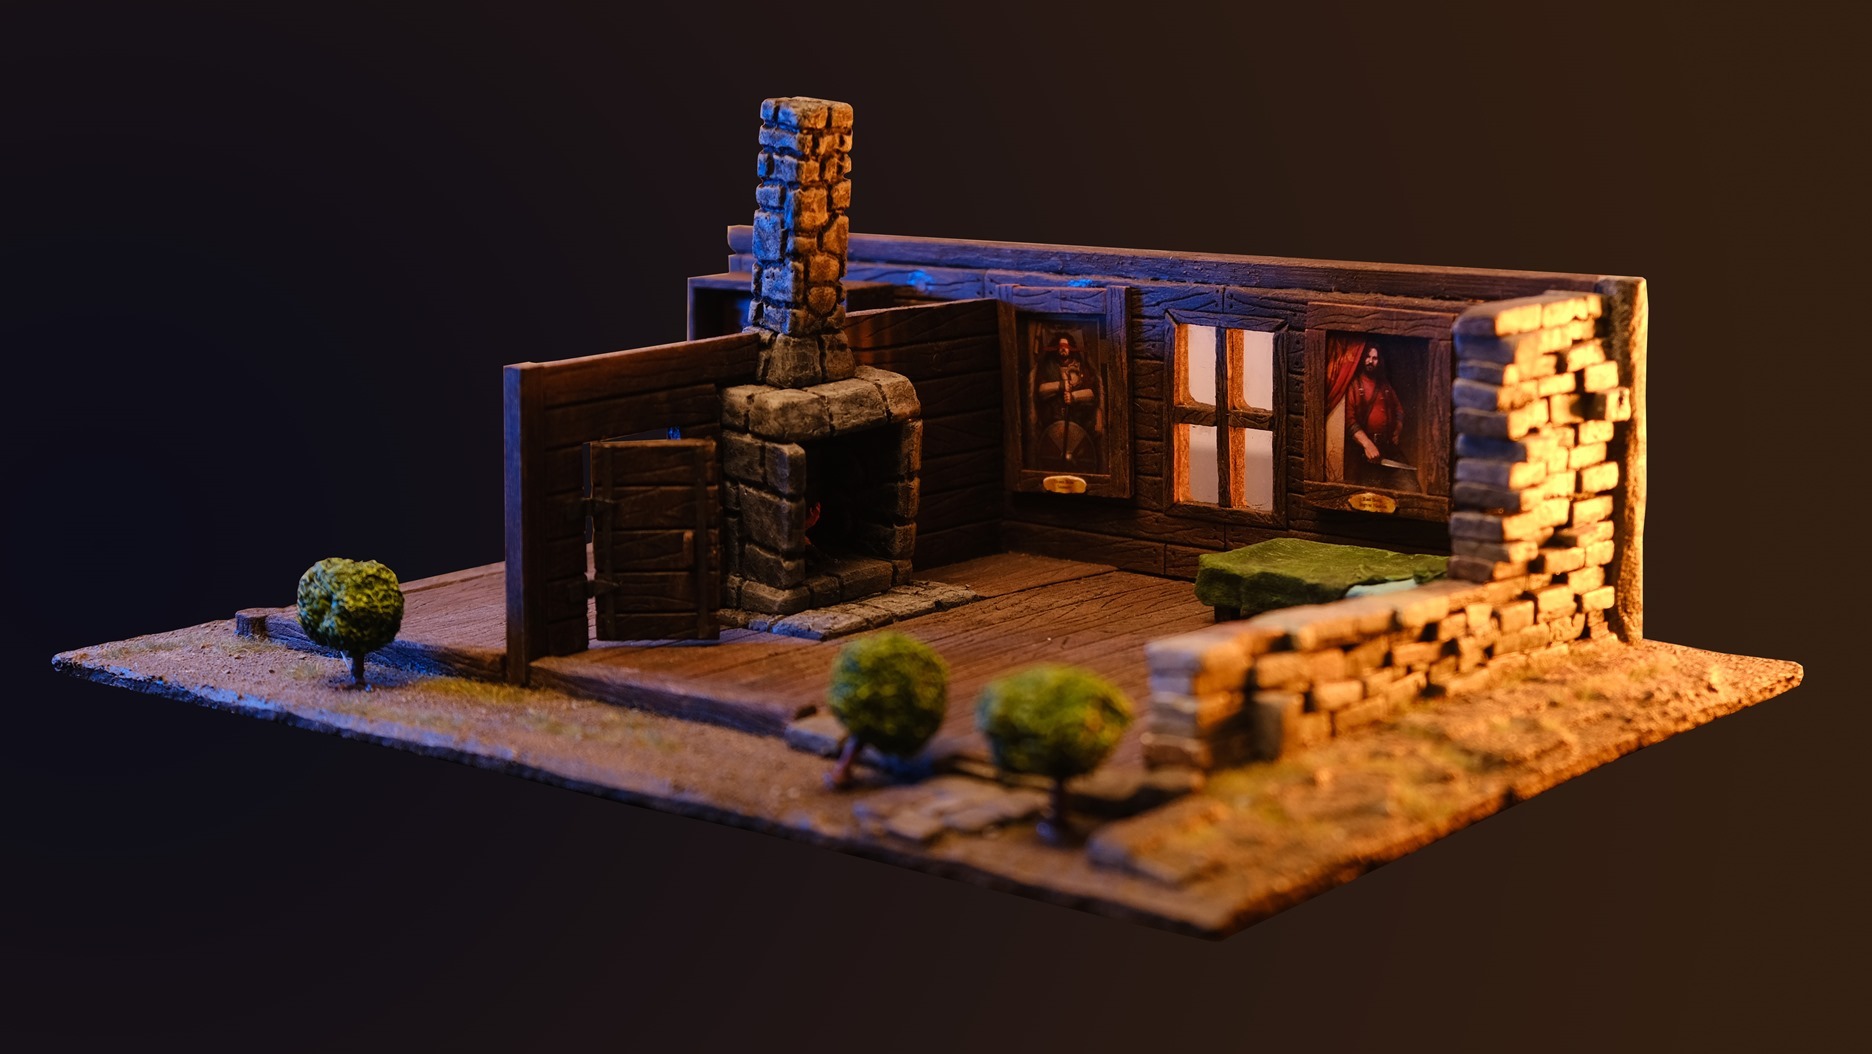 Ingvar Ninson House by Nik None - My, Crafts, Author's toy, Needlework without process, Games, Fantasy, Fantasy, Books, Miniature, Fictional characters, Board games, Tabletop role-playing games, Dungeons & dragons, Painting miniatures, Diorama, Figurines, Samizdat, Writing, Longpost